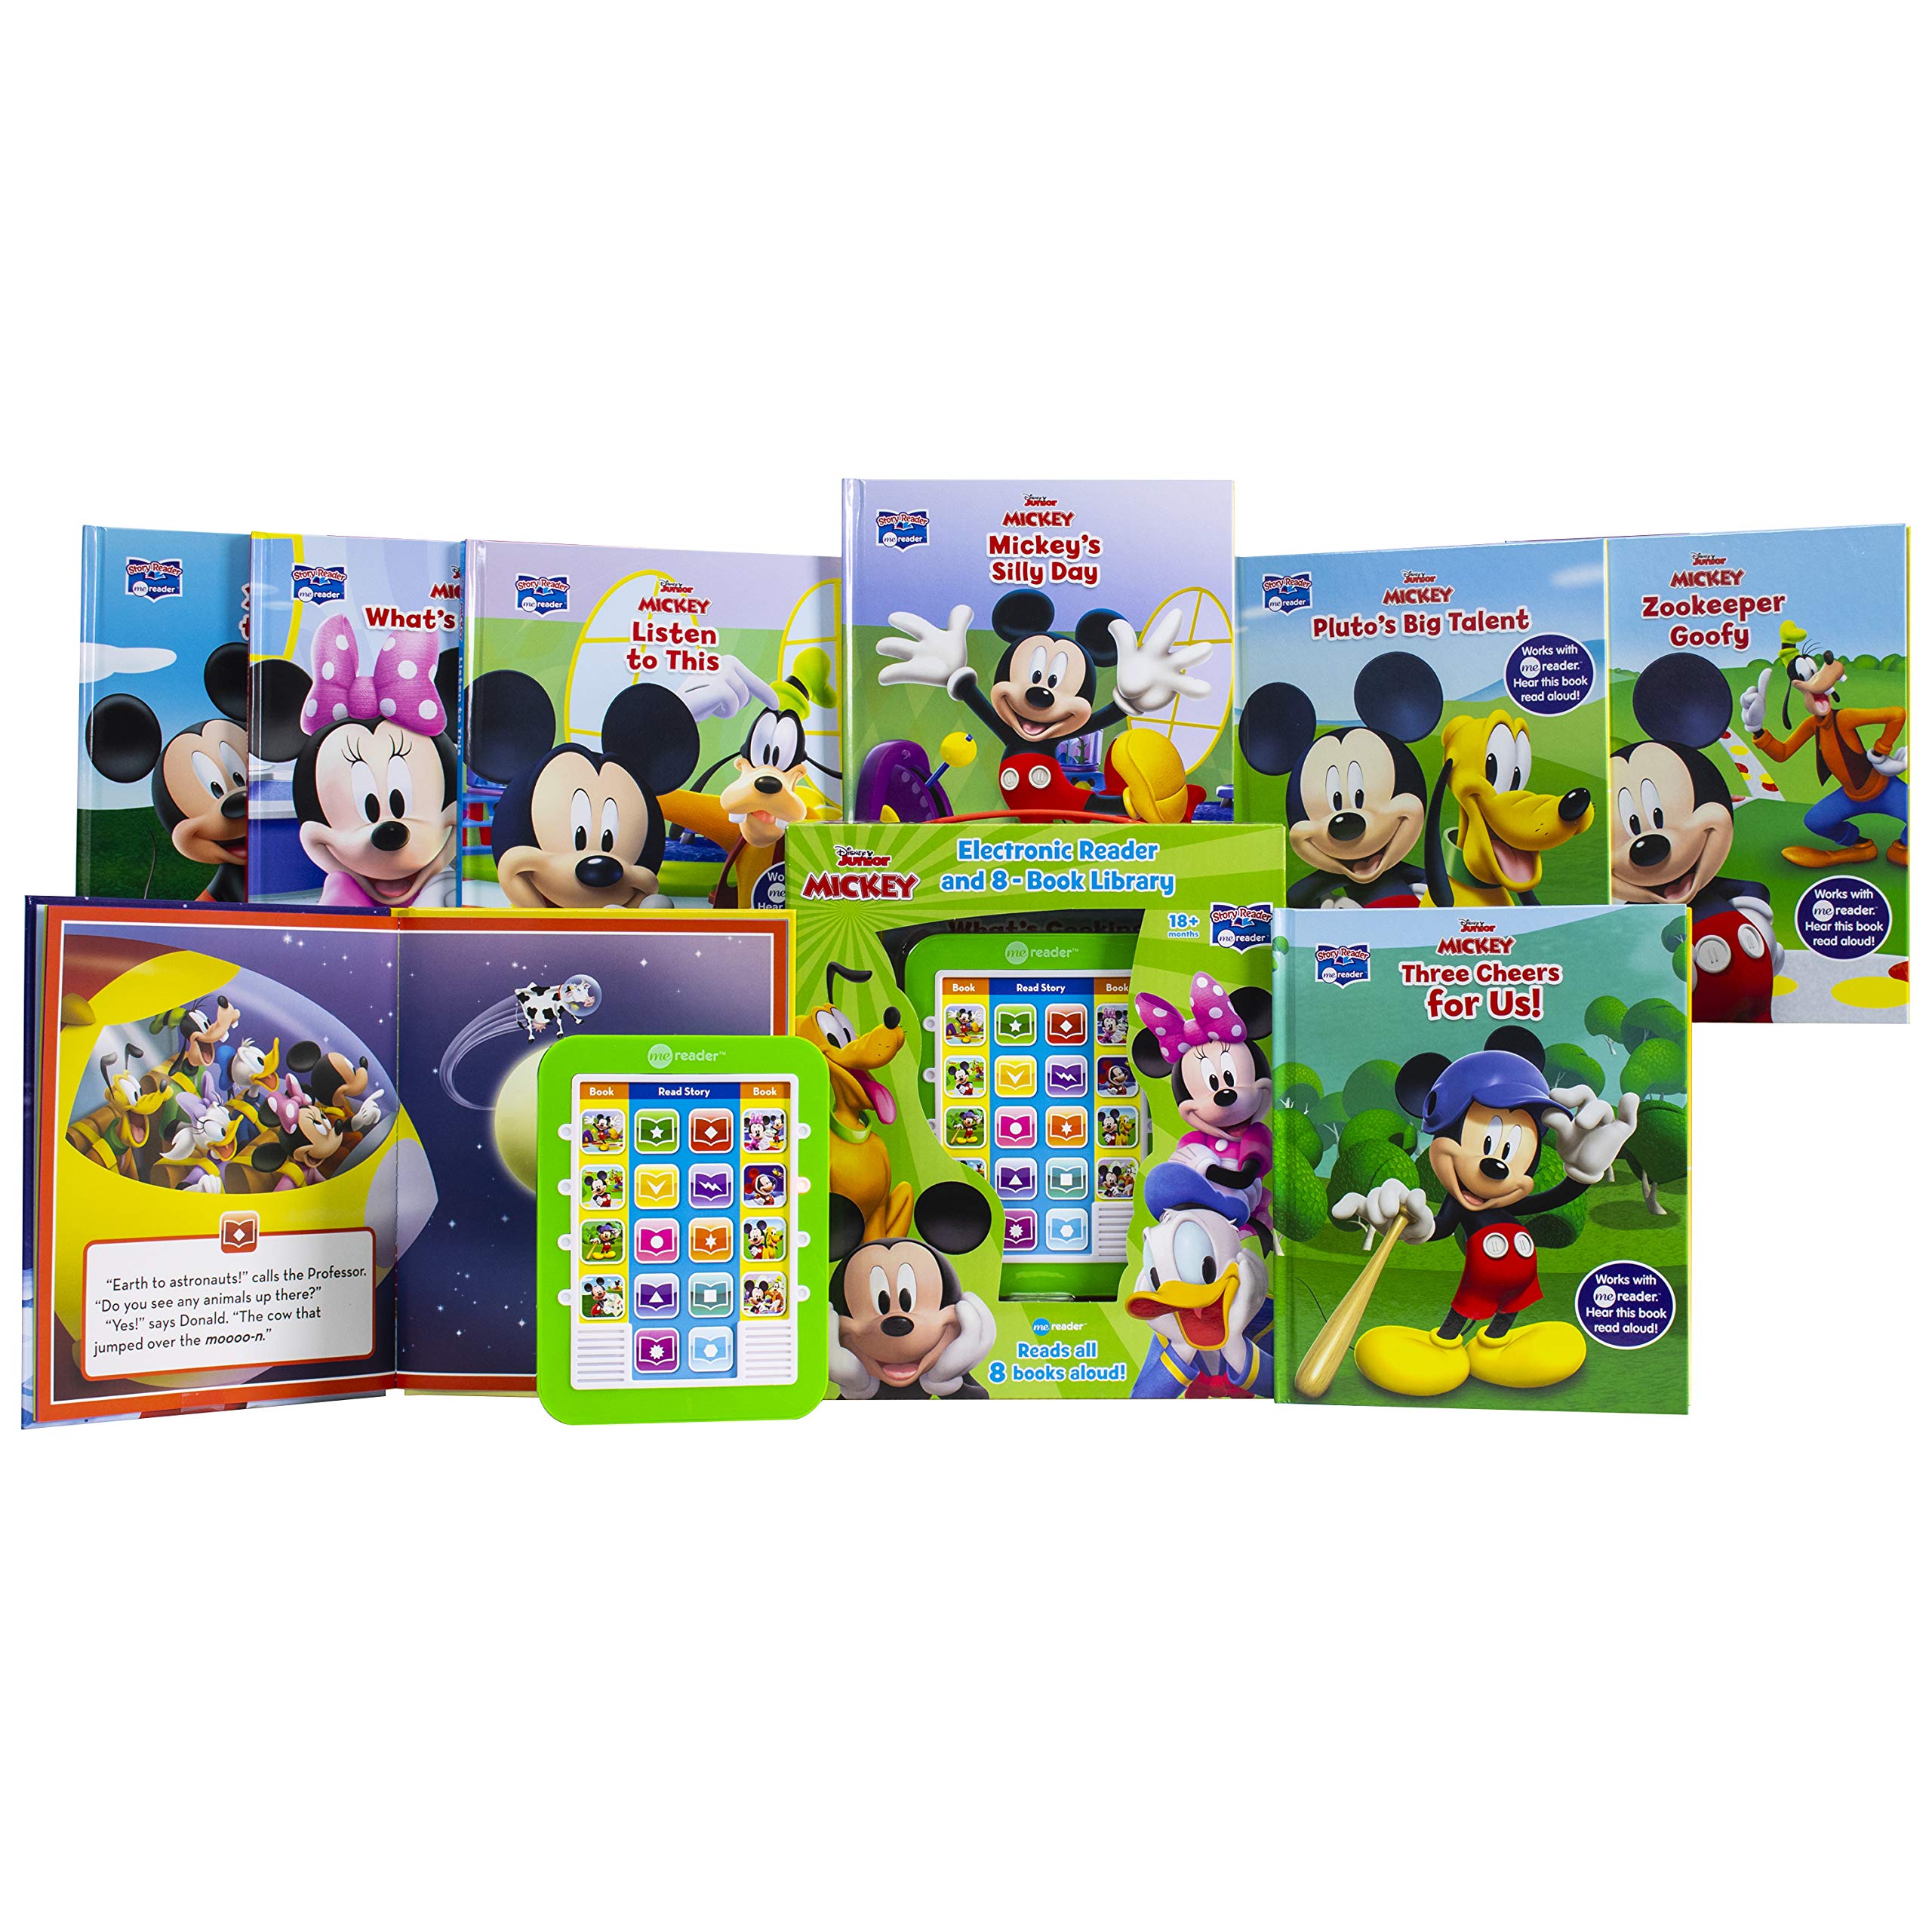 Disney Mickey Mouse - Me Reader Electronic Reader and 8 Sound Book Library - PI Kids